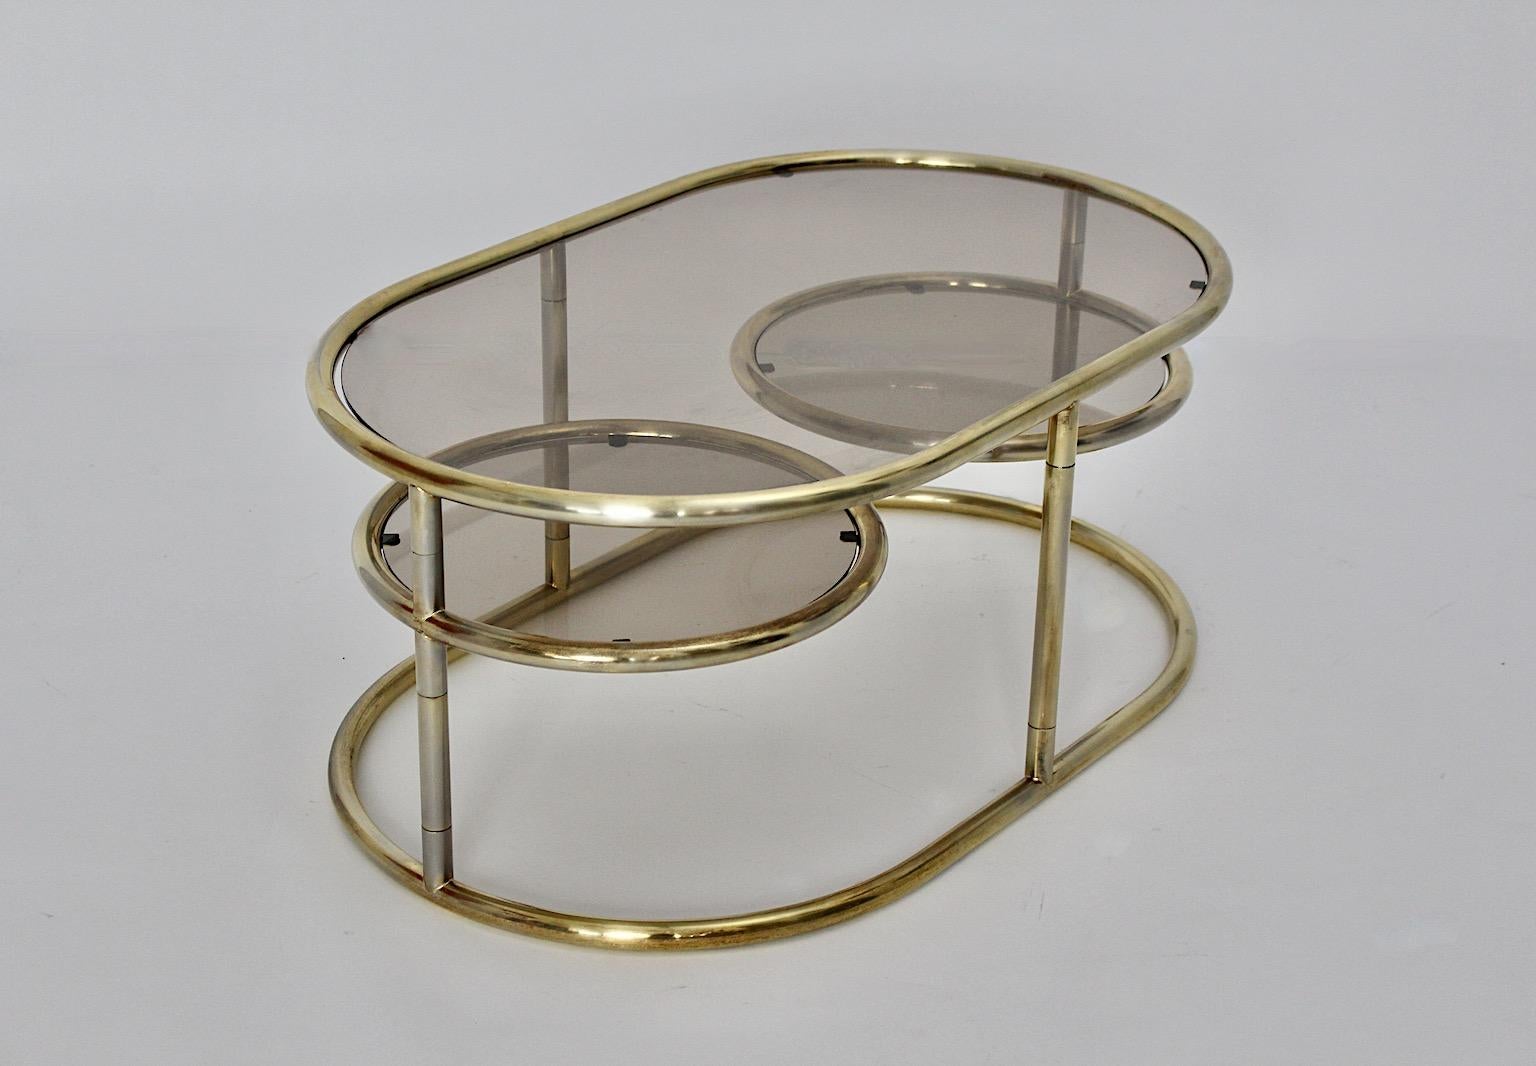 Italian Modernist Vintage Golden Metal Glass Oval Coffee Table Sofa Table, 1960s, Italy For Sale